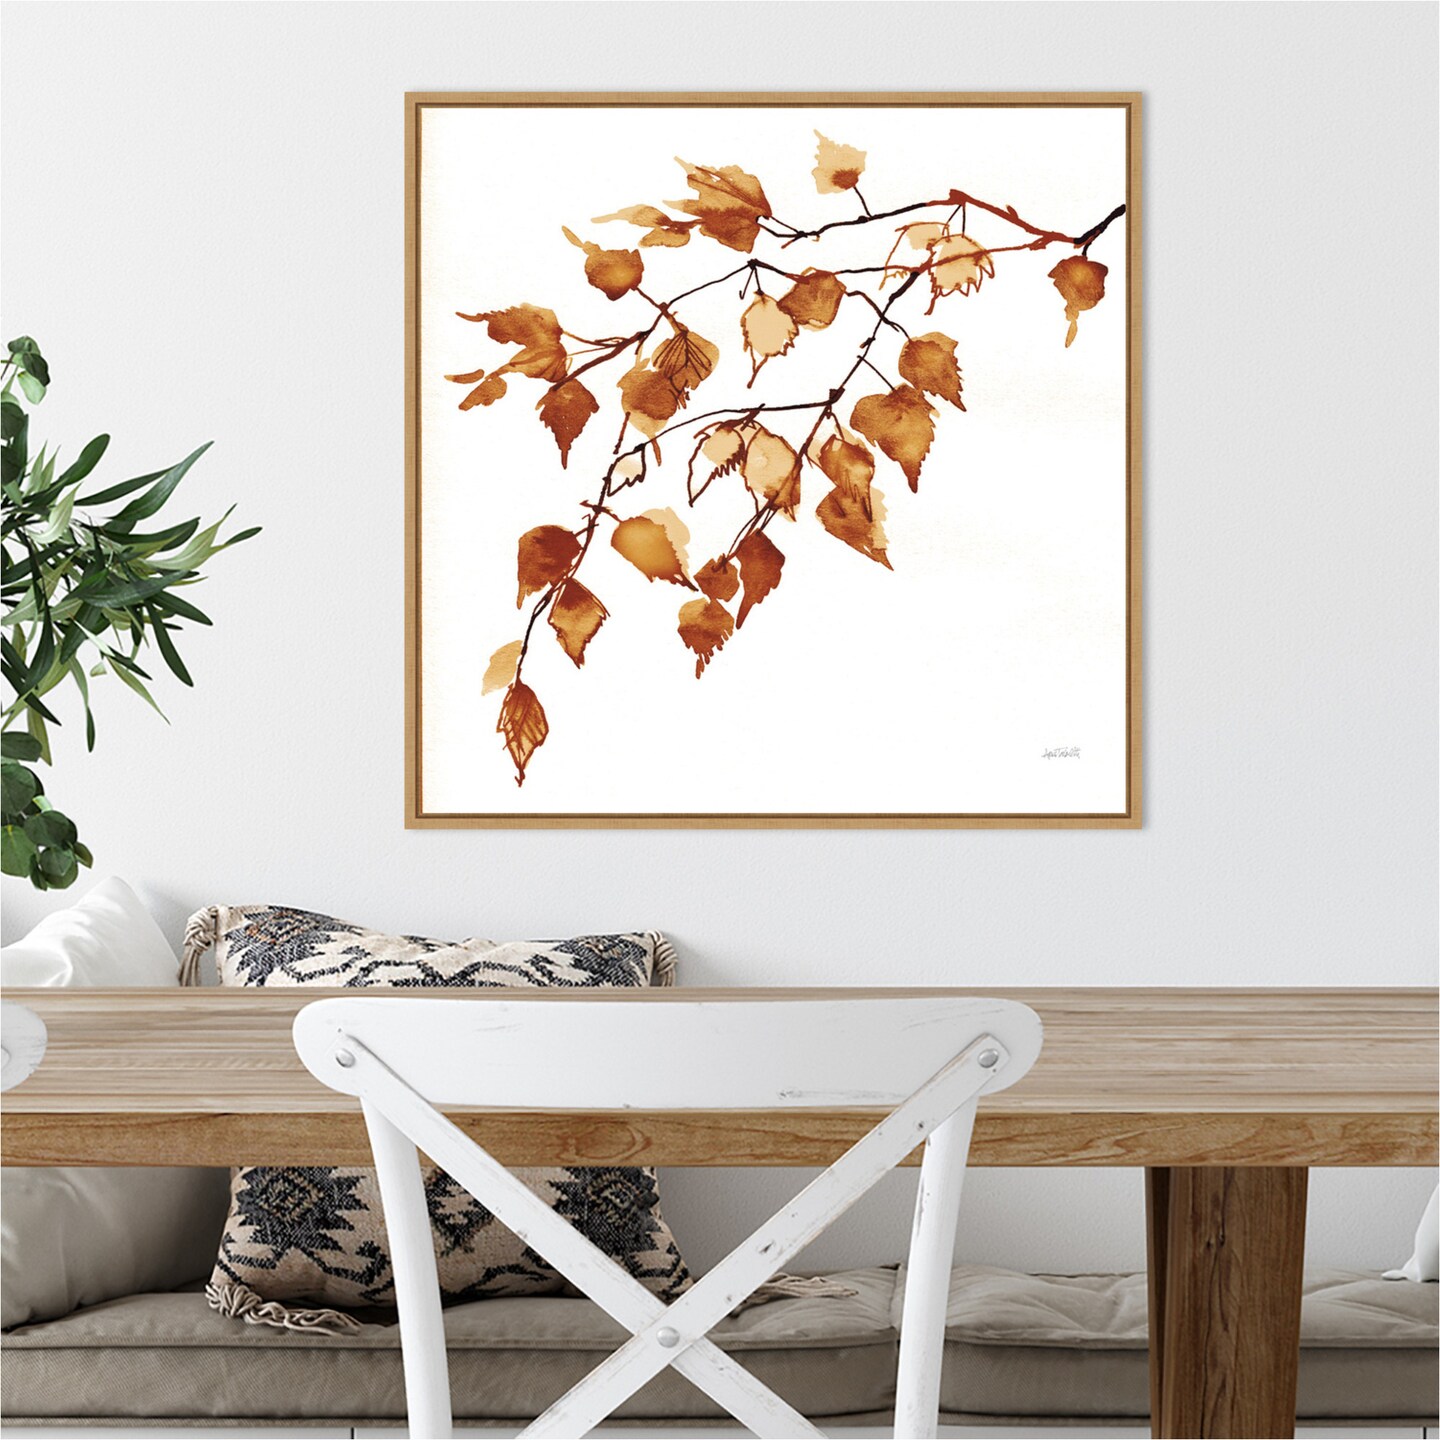 Colors of the Fall VIII by Anne Tavoletti 22-in. W x 22-in. H. Canvas Wall Art Print Framed in Natural